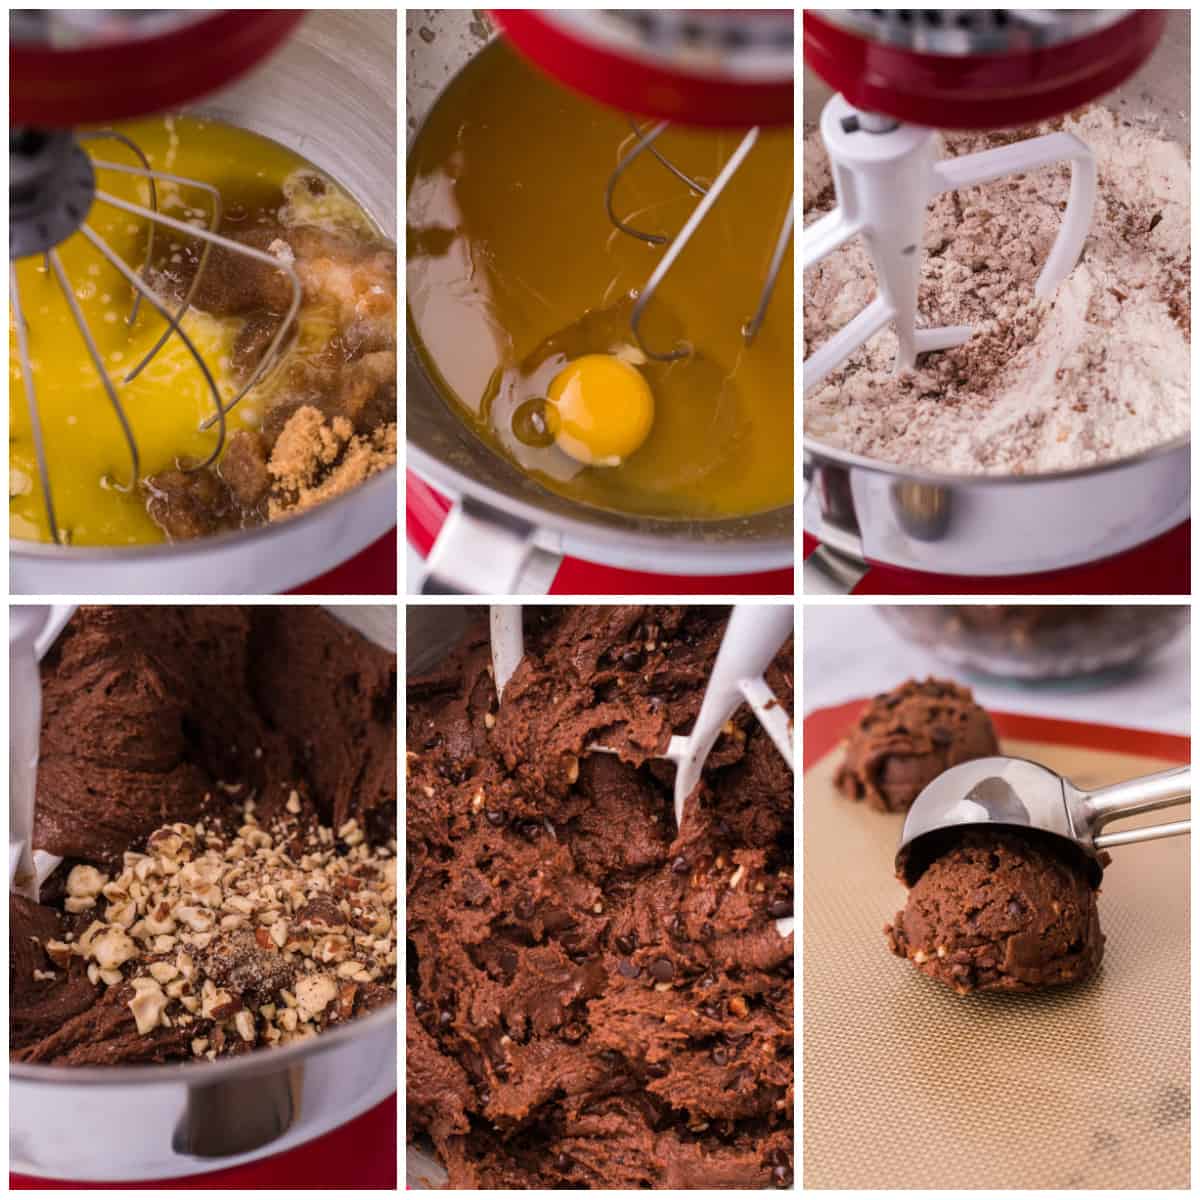 Step by step photos on how to make Chocolate Hazelnut Cookies.